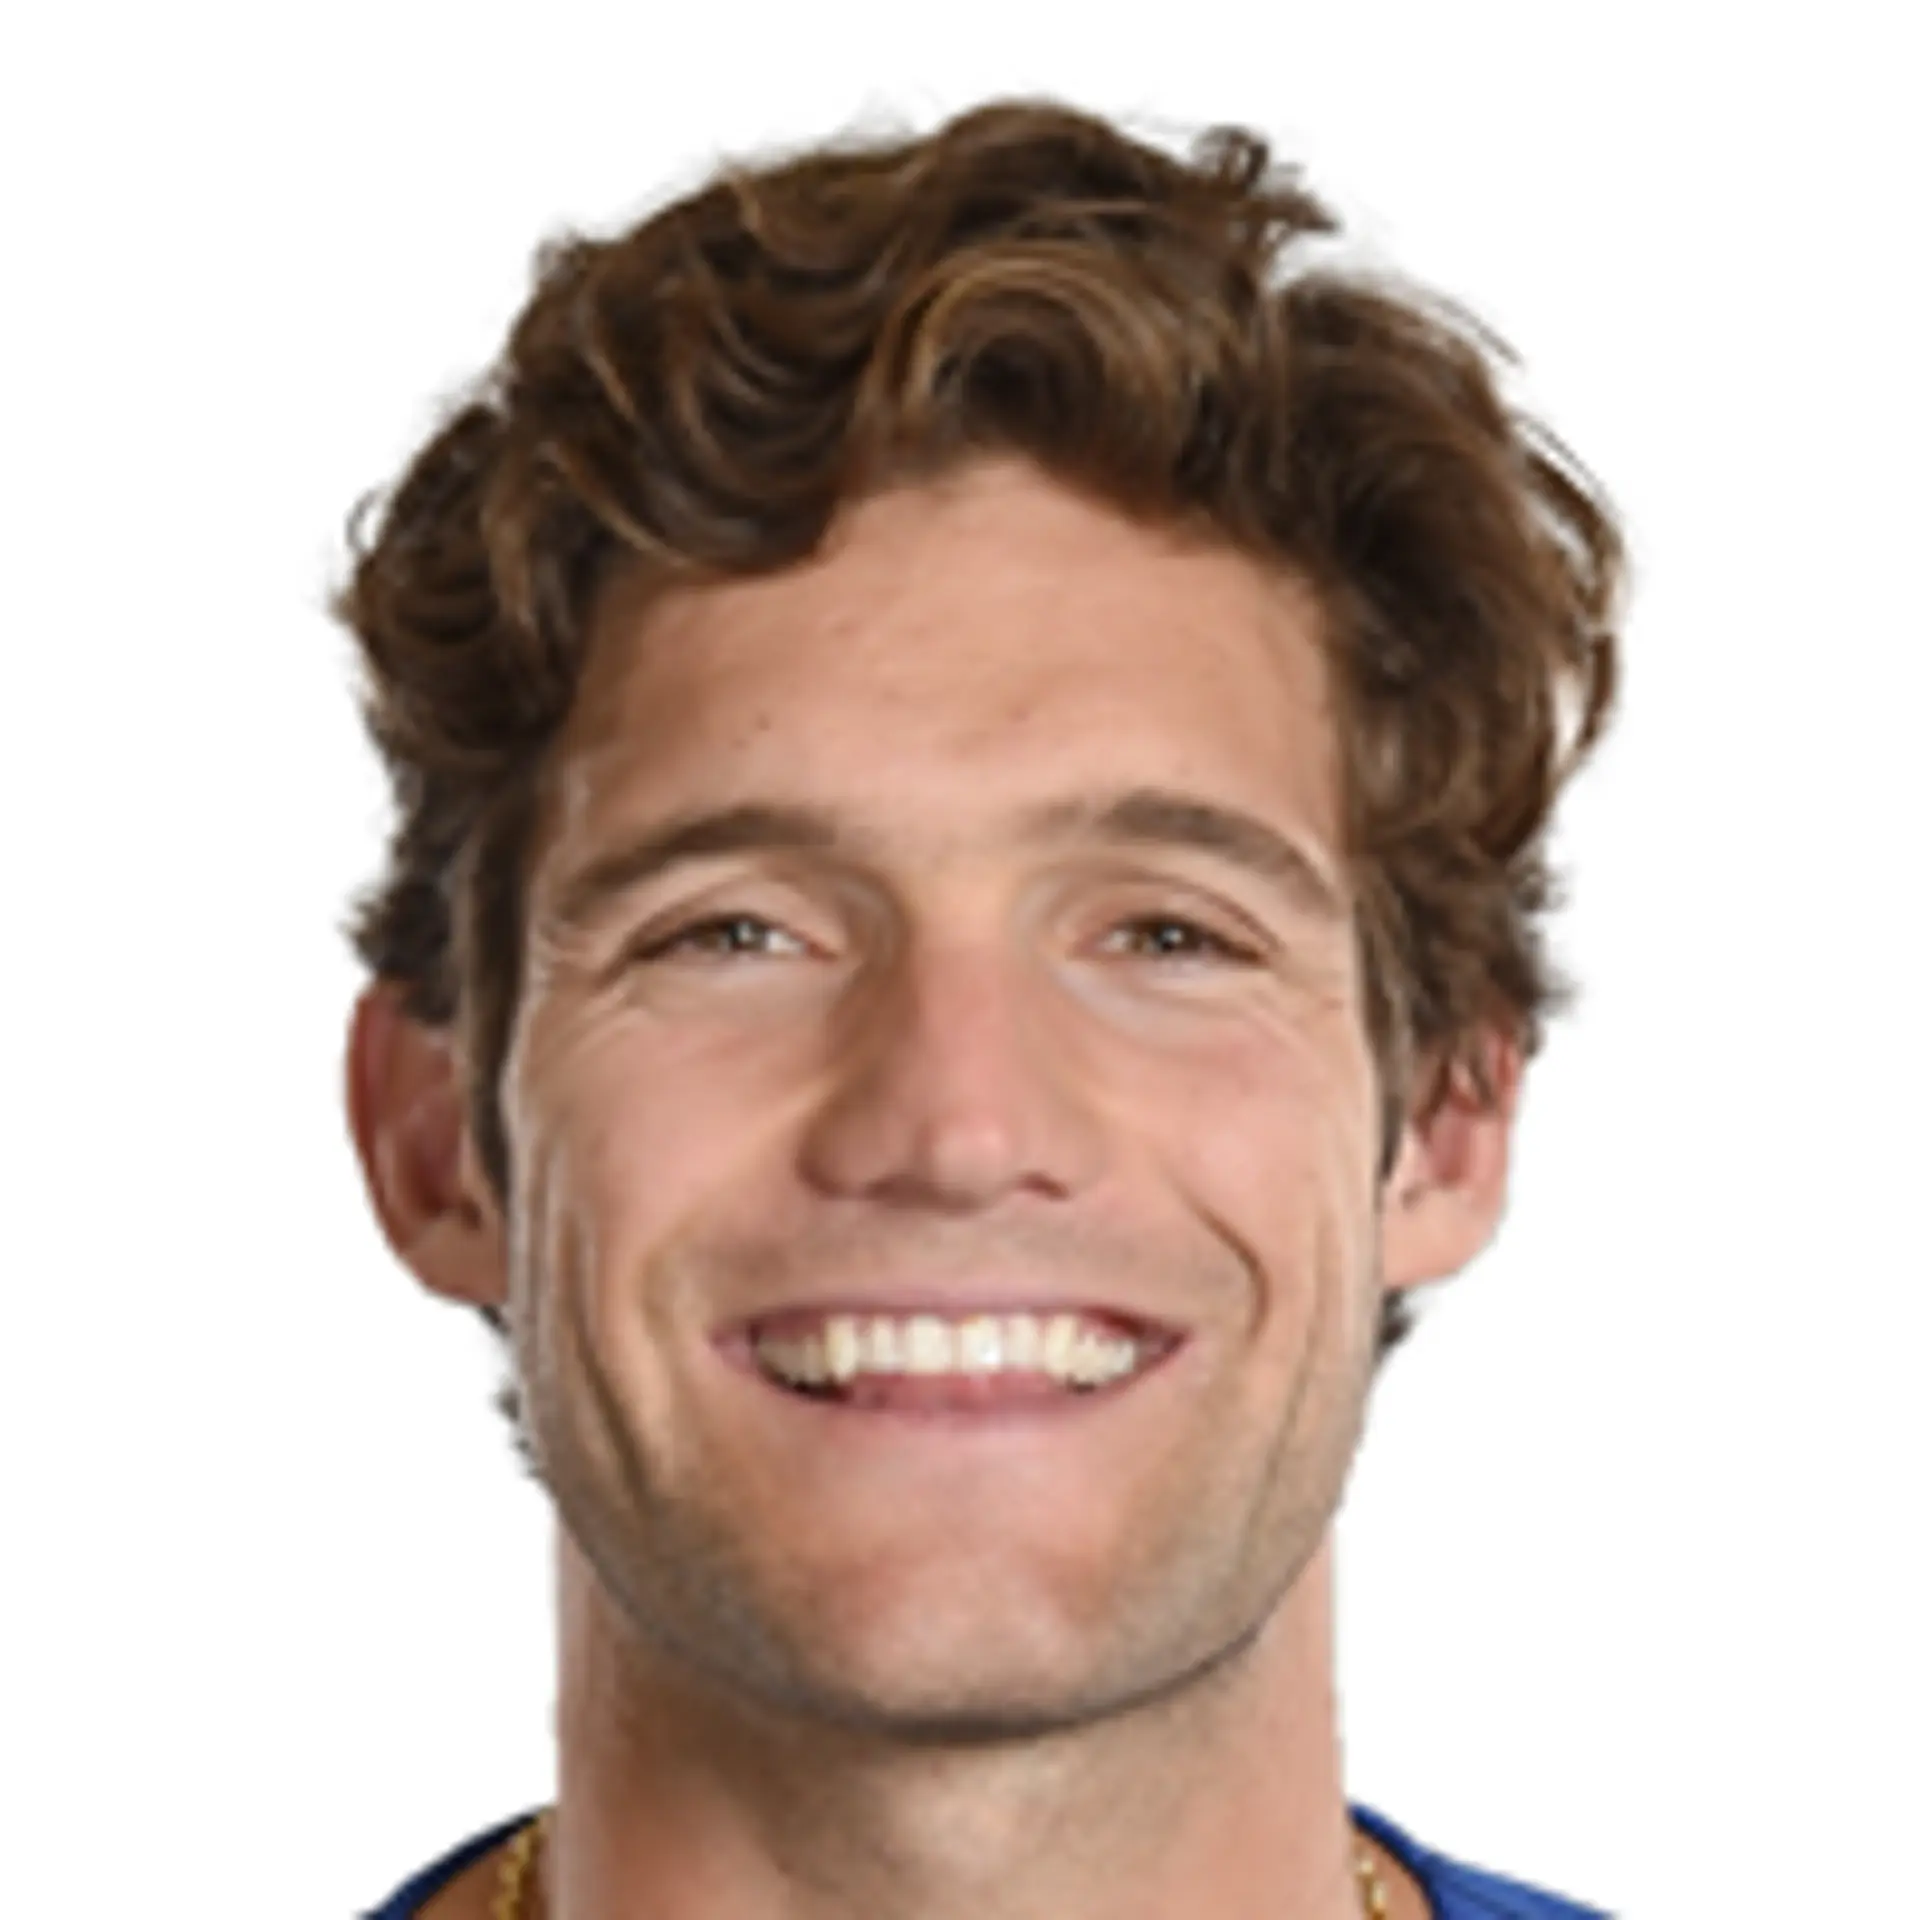 Marcos Alonso avatar